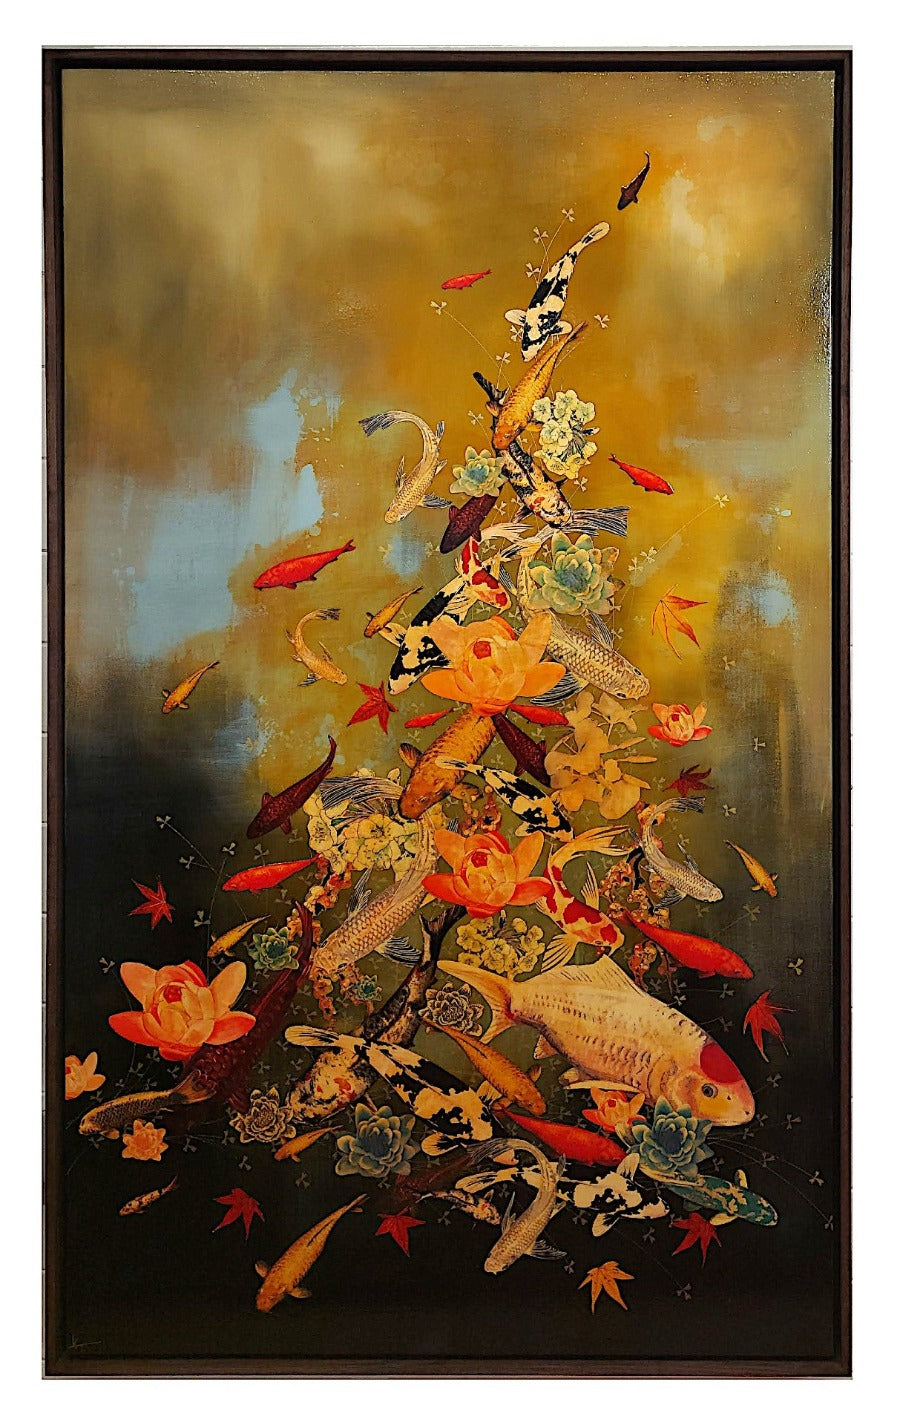 Koi on Ochre Pale Blue Black by Lily Greenwood | Contemporary Paintings for sale at The Biscuit Factory Newcastle